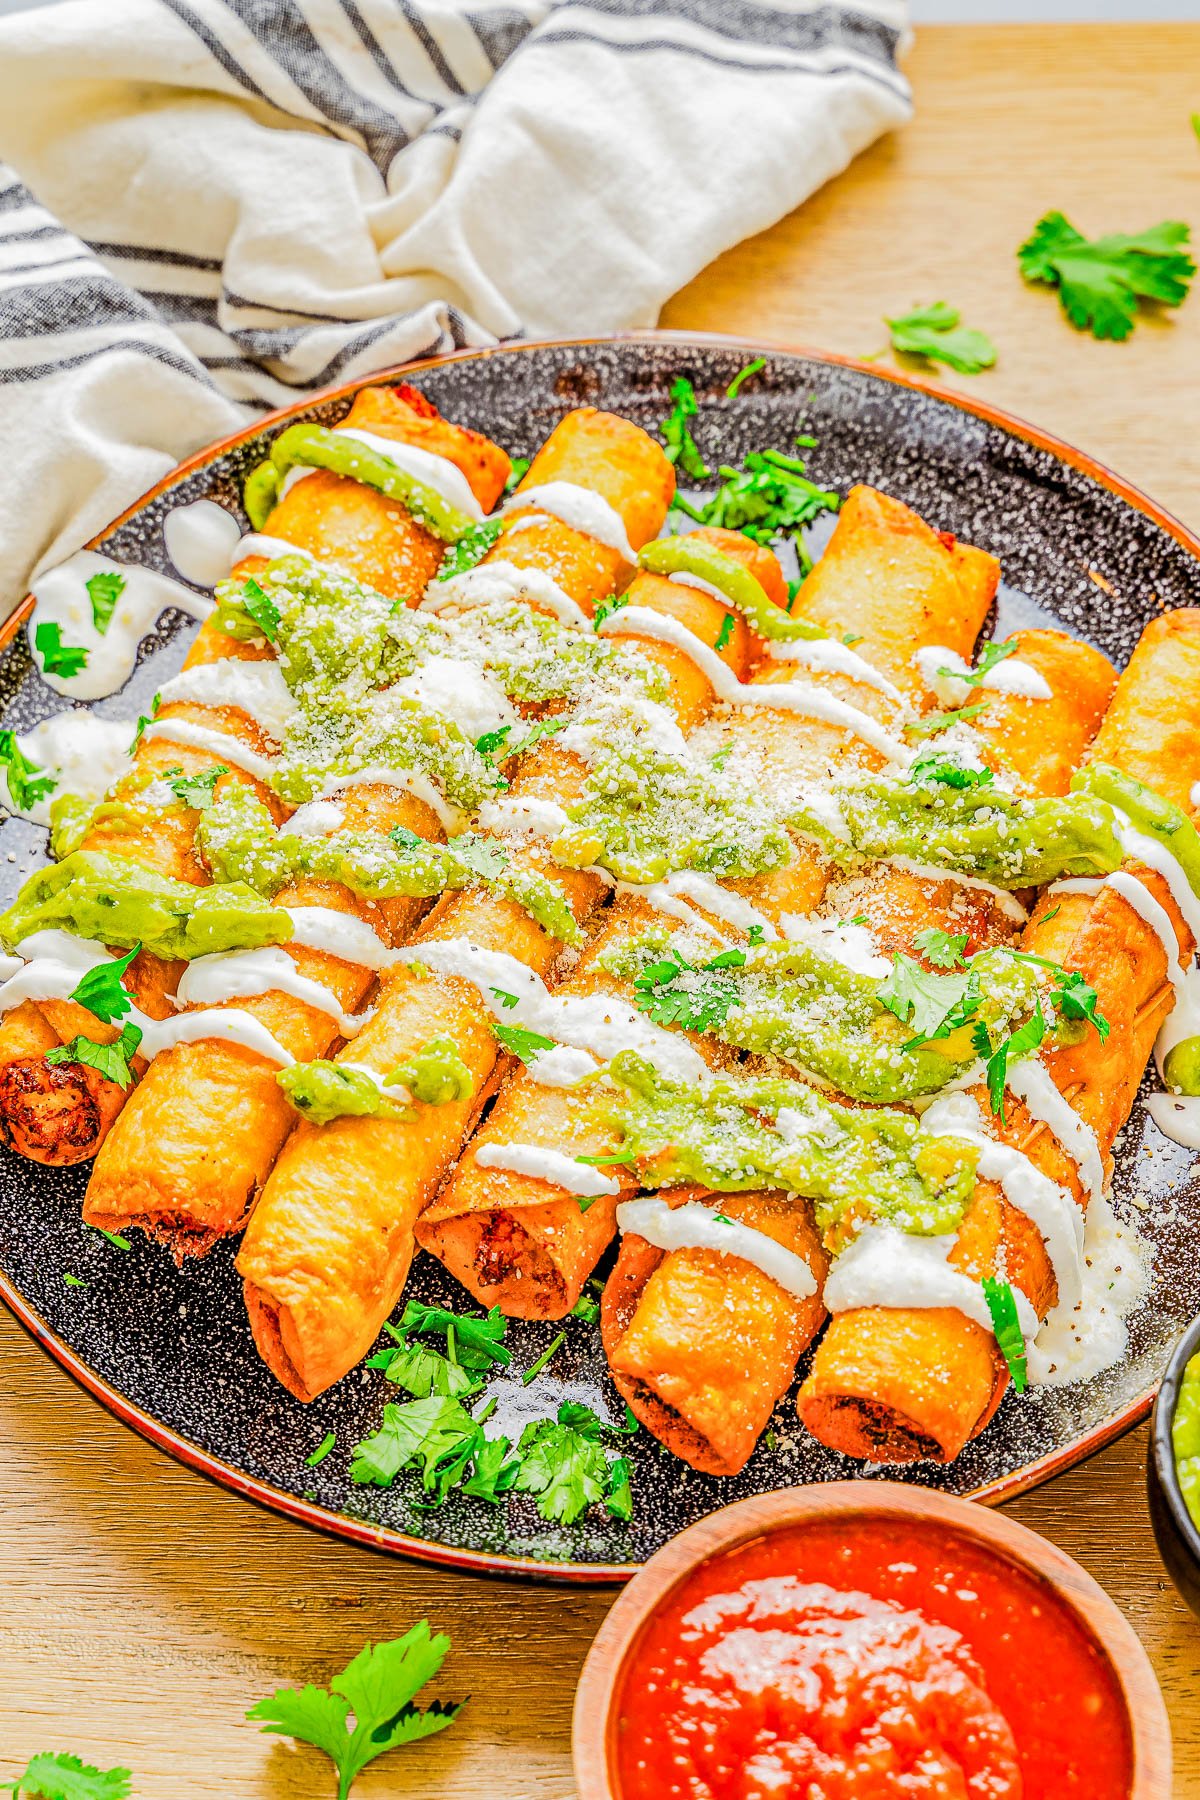 Plate of crispy taquitos drizzled with green sauce and sour cream, garnished with cilantro, served with a side of red salsa.